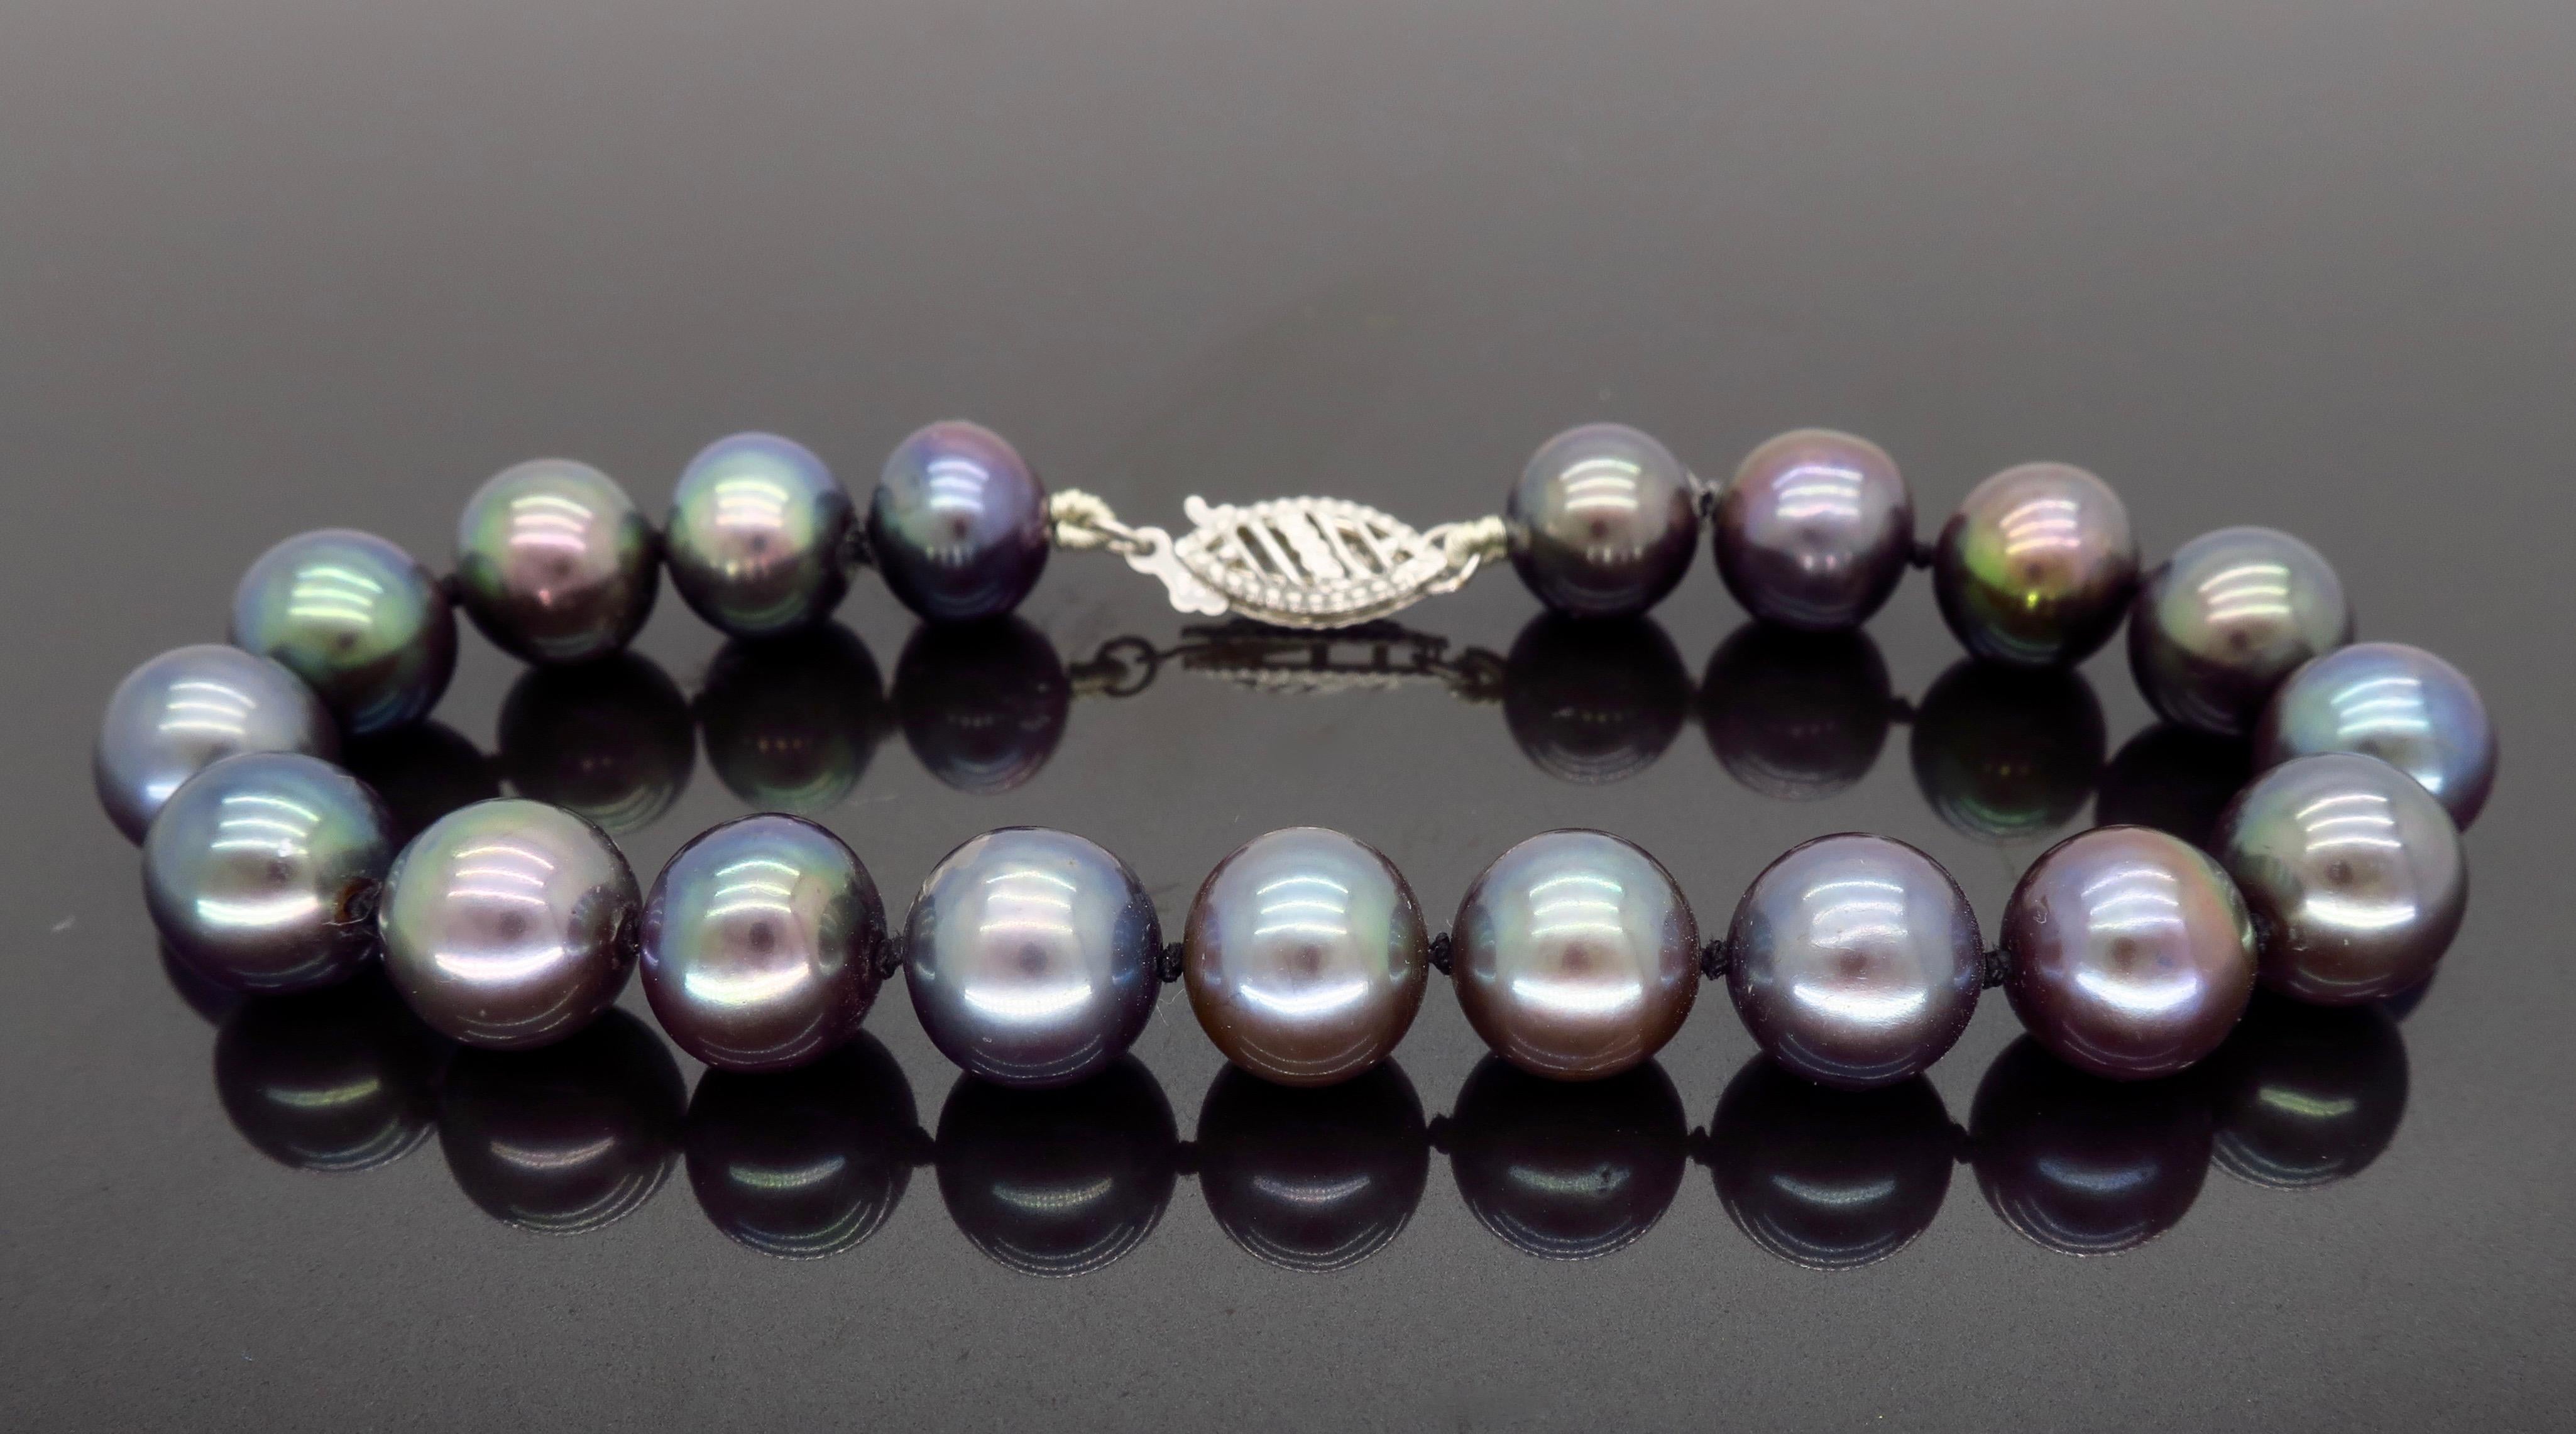 Beautiful black pearl bracelet with a stunning play of iridescent color, and ornate white gold clasp.

Gemstone: 19 Round Black Pearls
Gemstone Size: Approximately 8.6mm Round
Metal: 14K White Gold
Marked/Tested: Stamped “14K